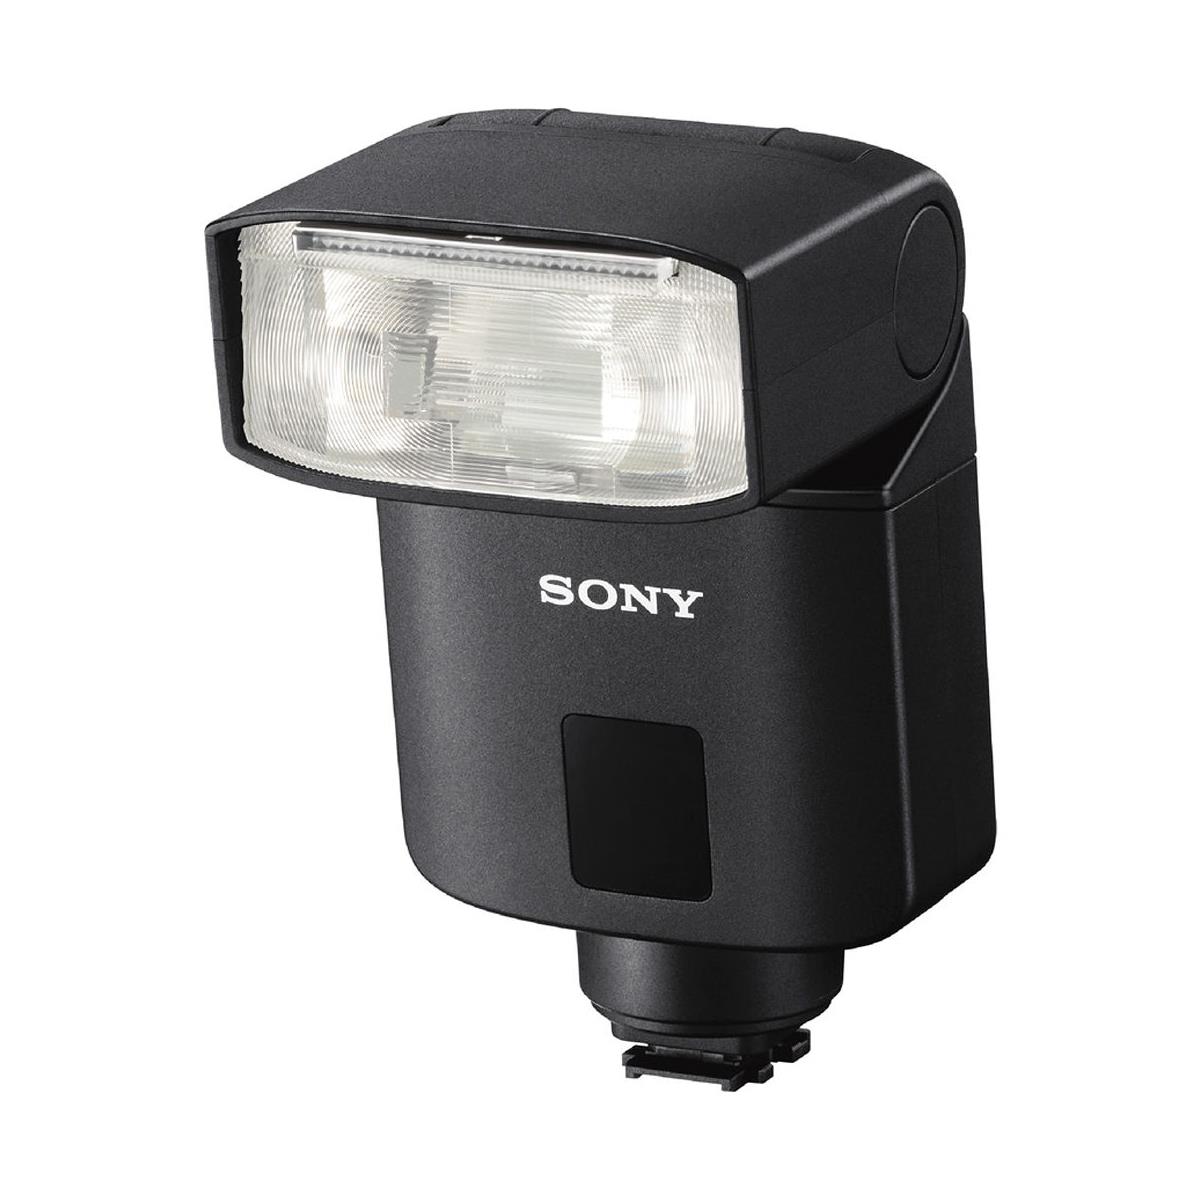 Image of Sony HVL-F32M TTL External Flash for Sony alpha7 Series Cameras